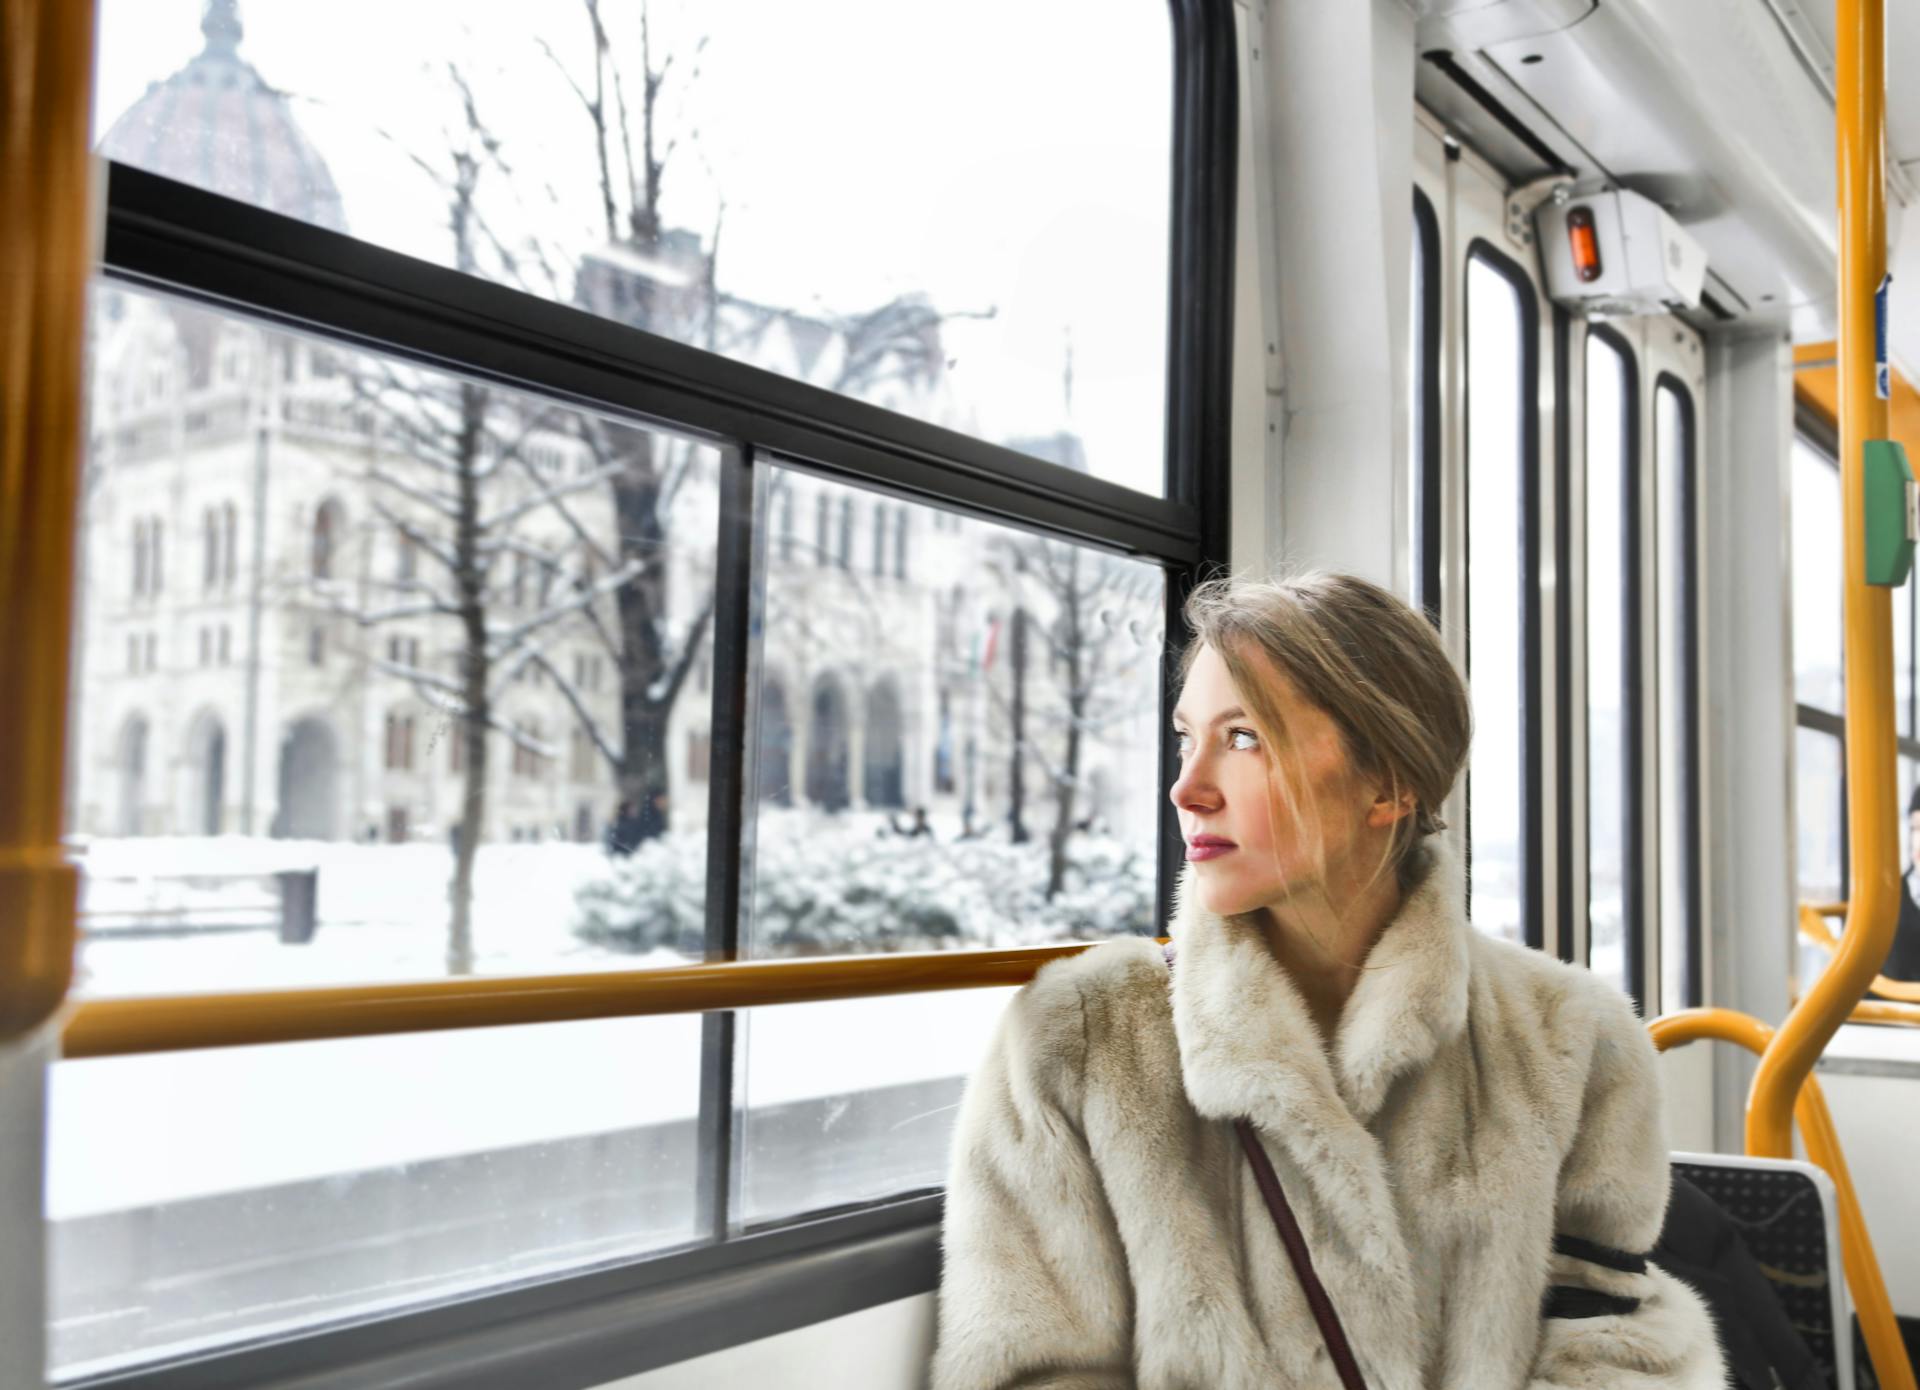 A woman traveling in a commuter bus | Source: Pexels